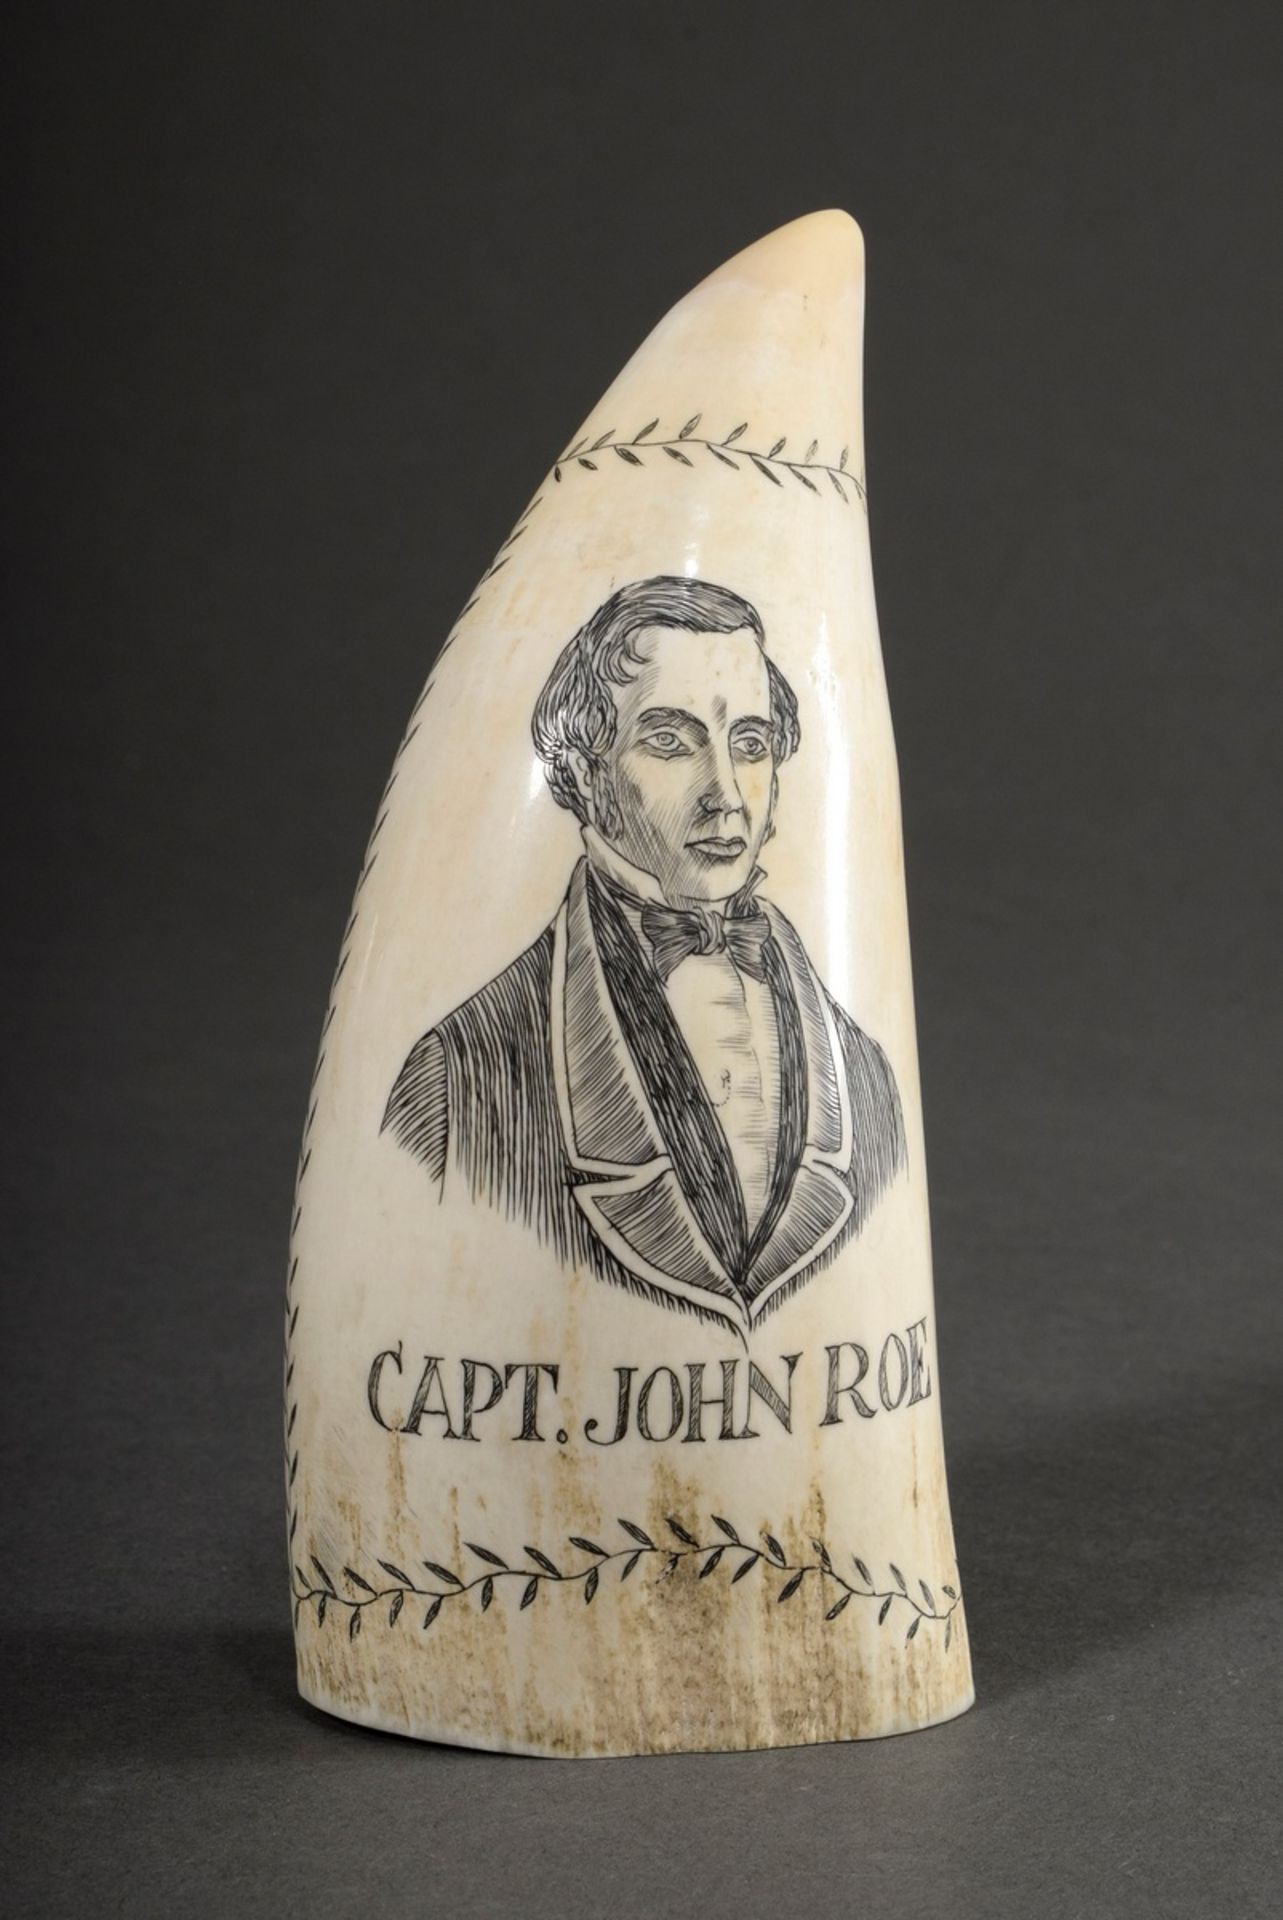 Scrimshaw "The Mary - Capt. John Roe", America, east coast, probably 19th c., 311g, h. 13.5cm, some